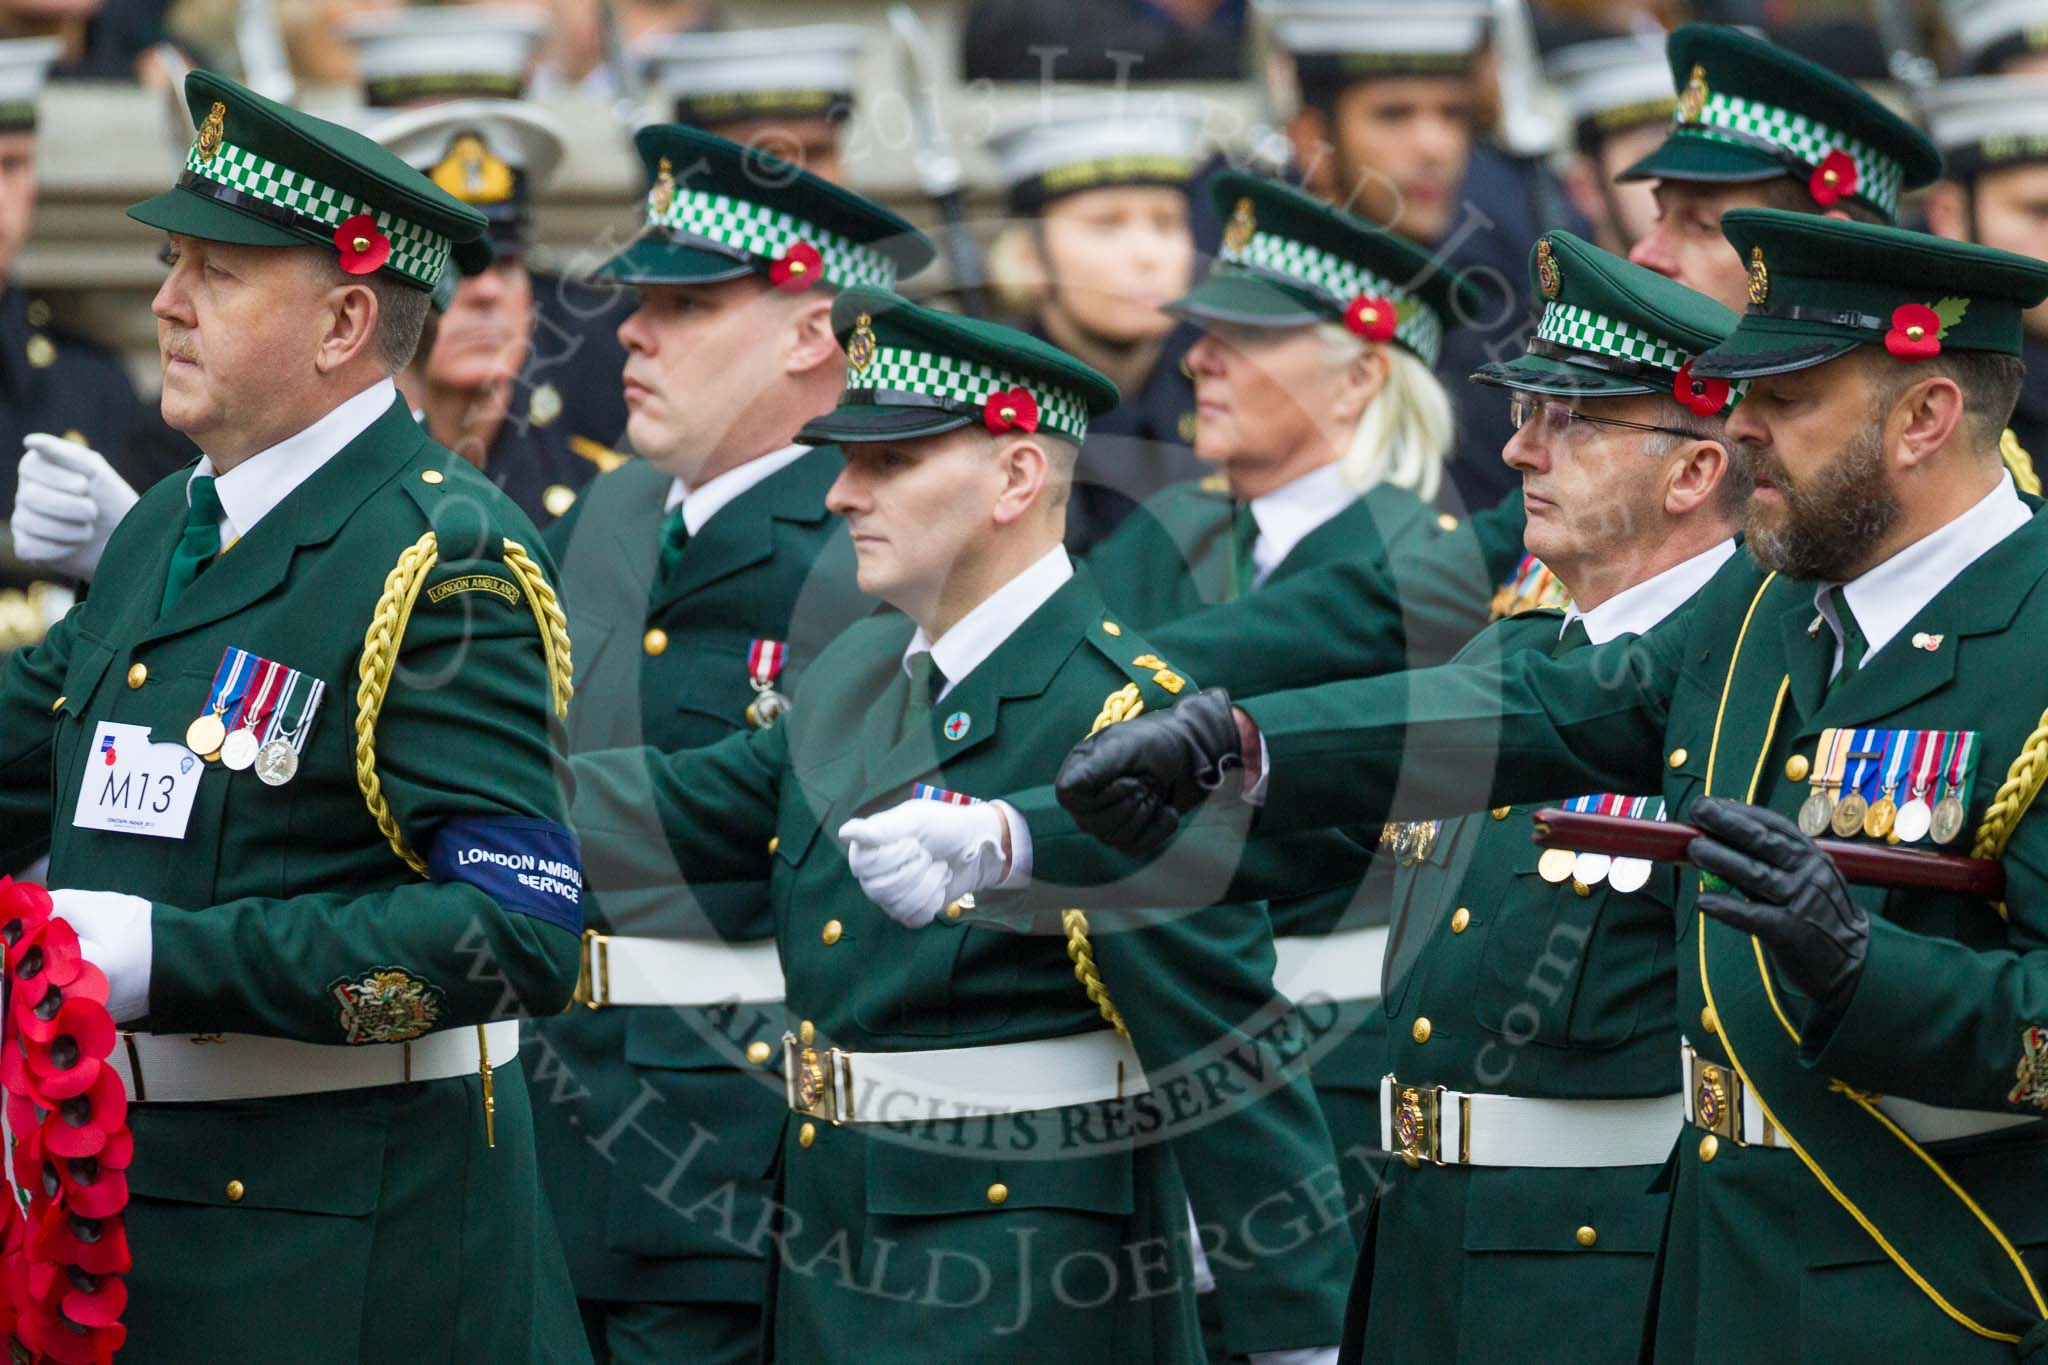 Remembrance Sunday at the Cenotaph 2015: Group M13, London Ambulance Service NHS Trust.
Cenotaph, Whitehall, London SW1,
London,
Greater London,
United Kingdom,
on 08 November 2015 at 12:16, image #1492